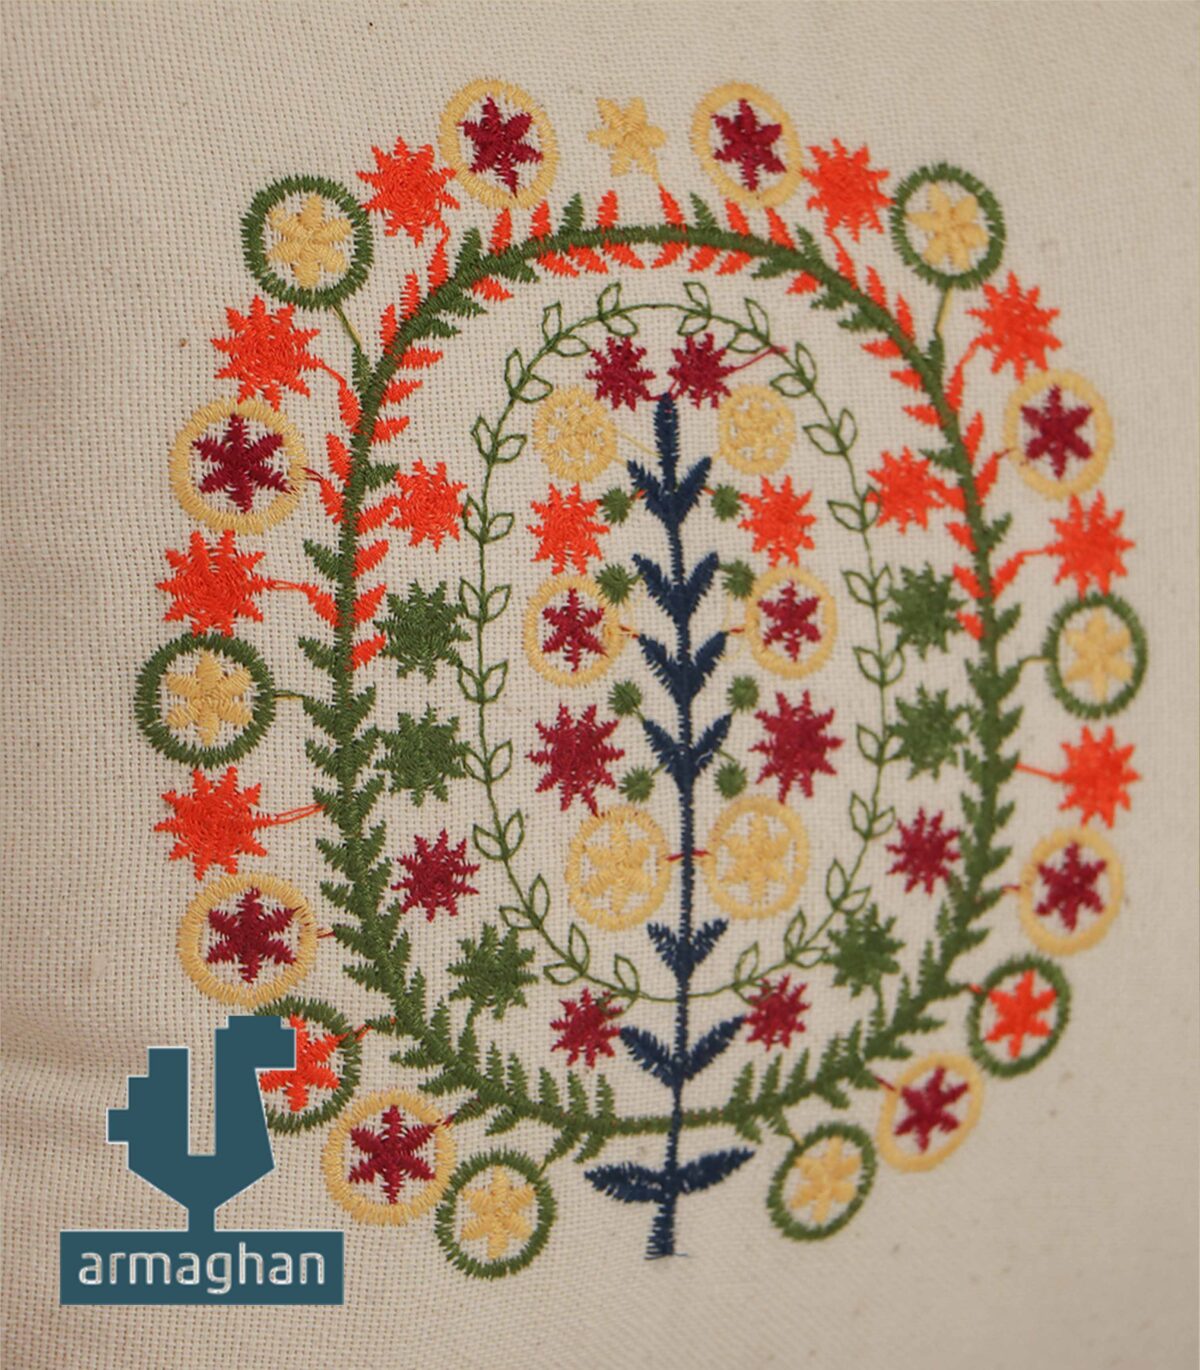 Buy an embroidered cushion close-up